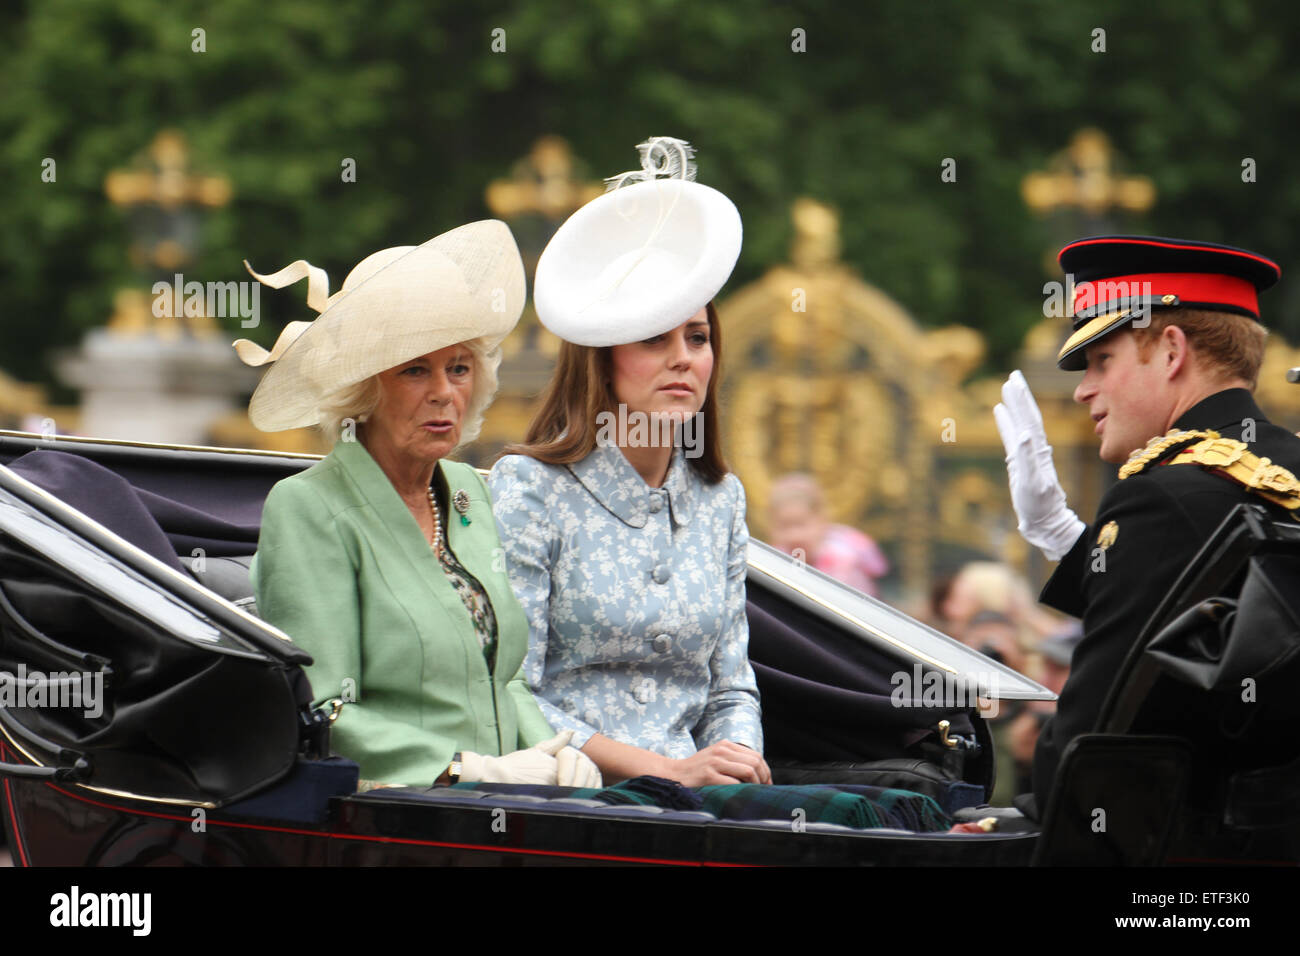 London, UK. 13th June, 2015. Camilla, Duchess of Cornwall with Catherine, Duchess of Cambridge and Prince Harry seen on a horse-drawn carriage at the Mall. .Since 1987, The Queen has attended in a carriage rather than riding, which she did before that on 36 occasions, riding side-saddle and wearing the uniform of the regiment whose Colour was being trooped. Credit:  david mbiyu/Alamy Live News Stock Photo